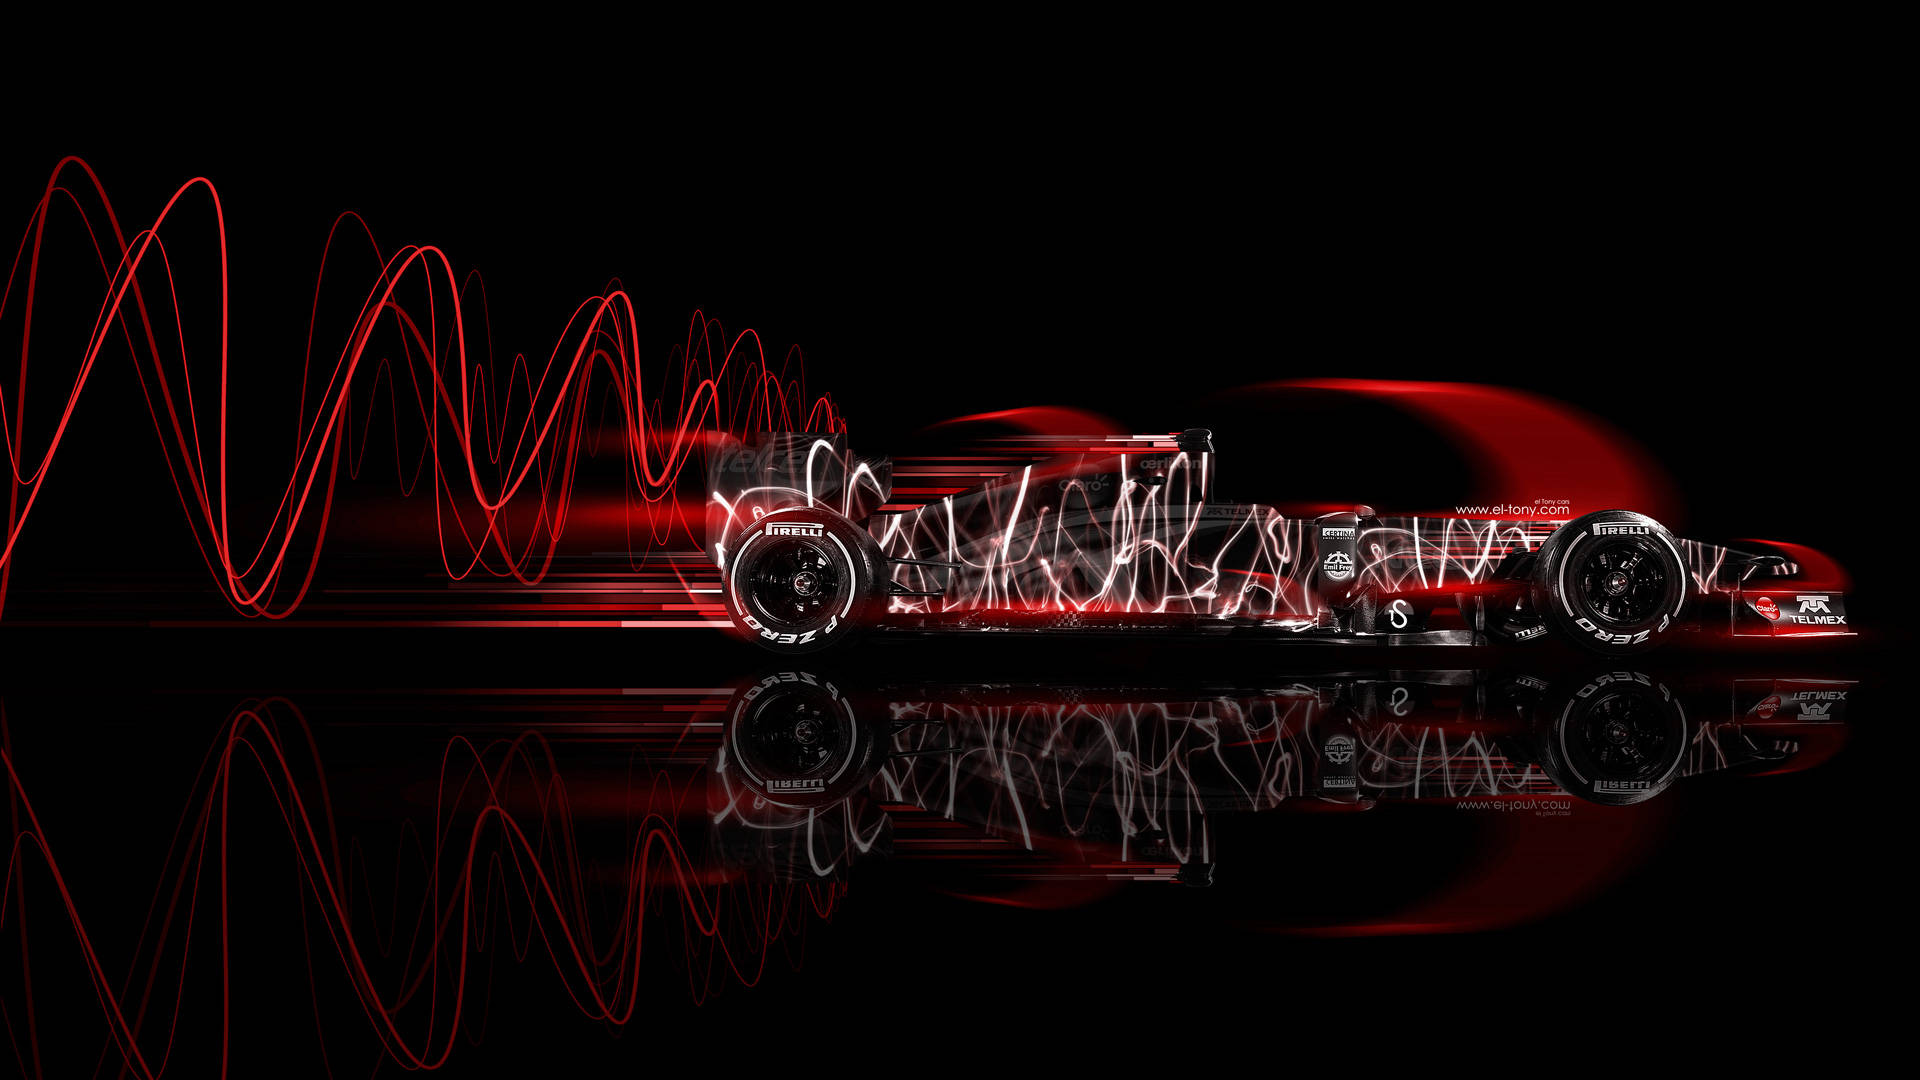 A Red Racing Car With Waves On It Wallpaper